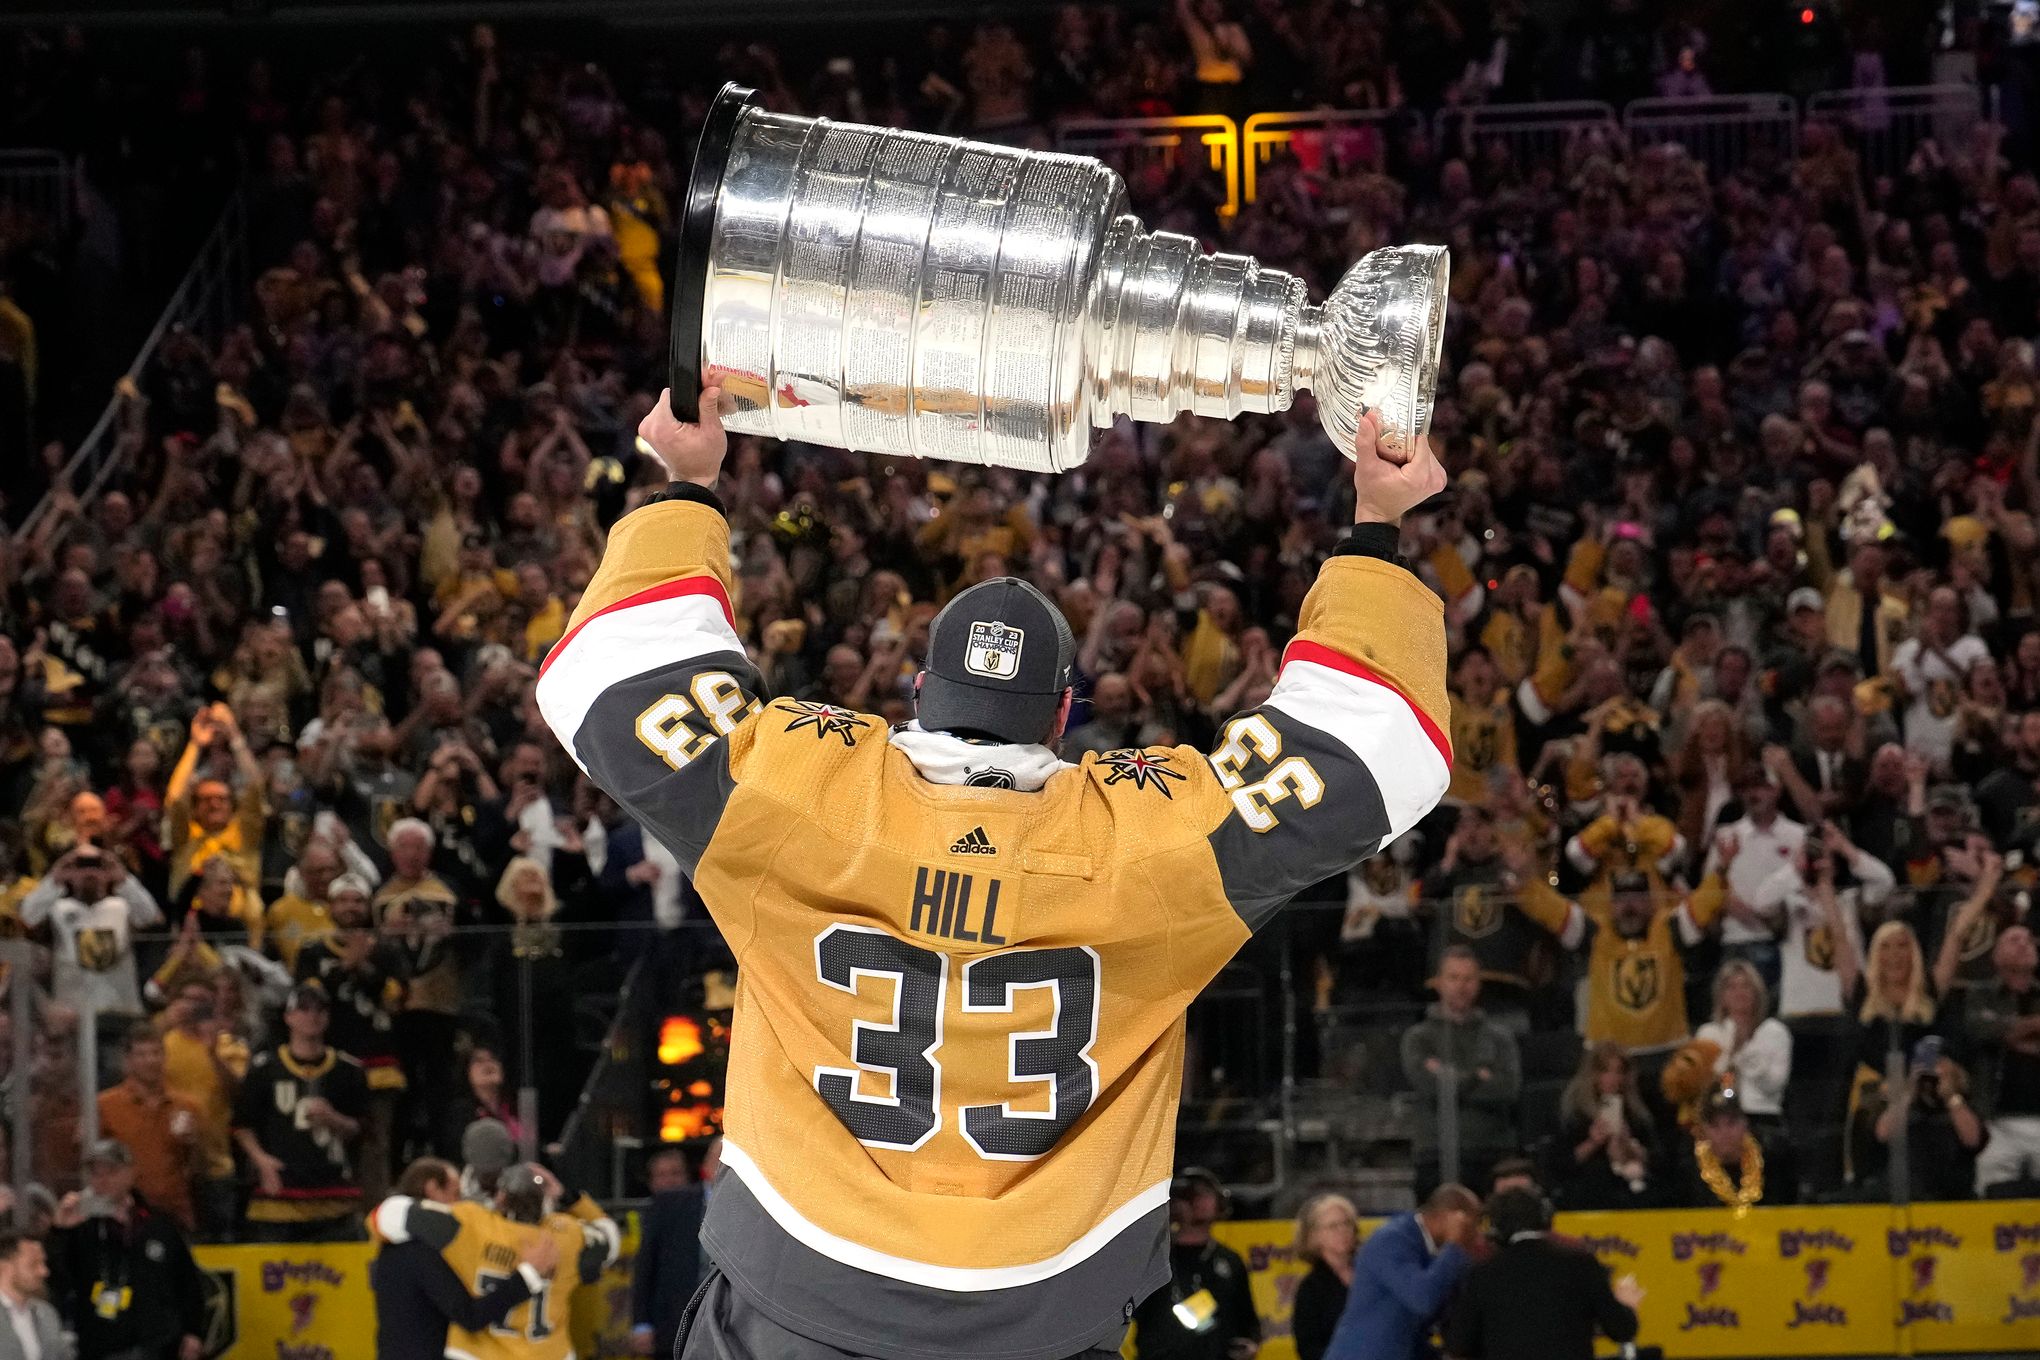 Golden Knights Stanley Cup Win a Major Moment for Vegas Sports